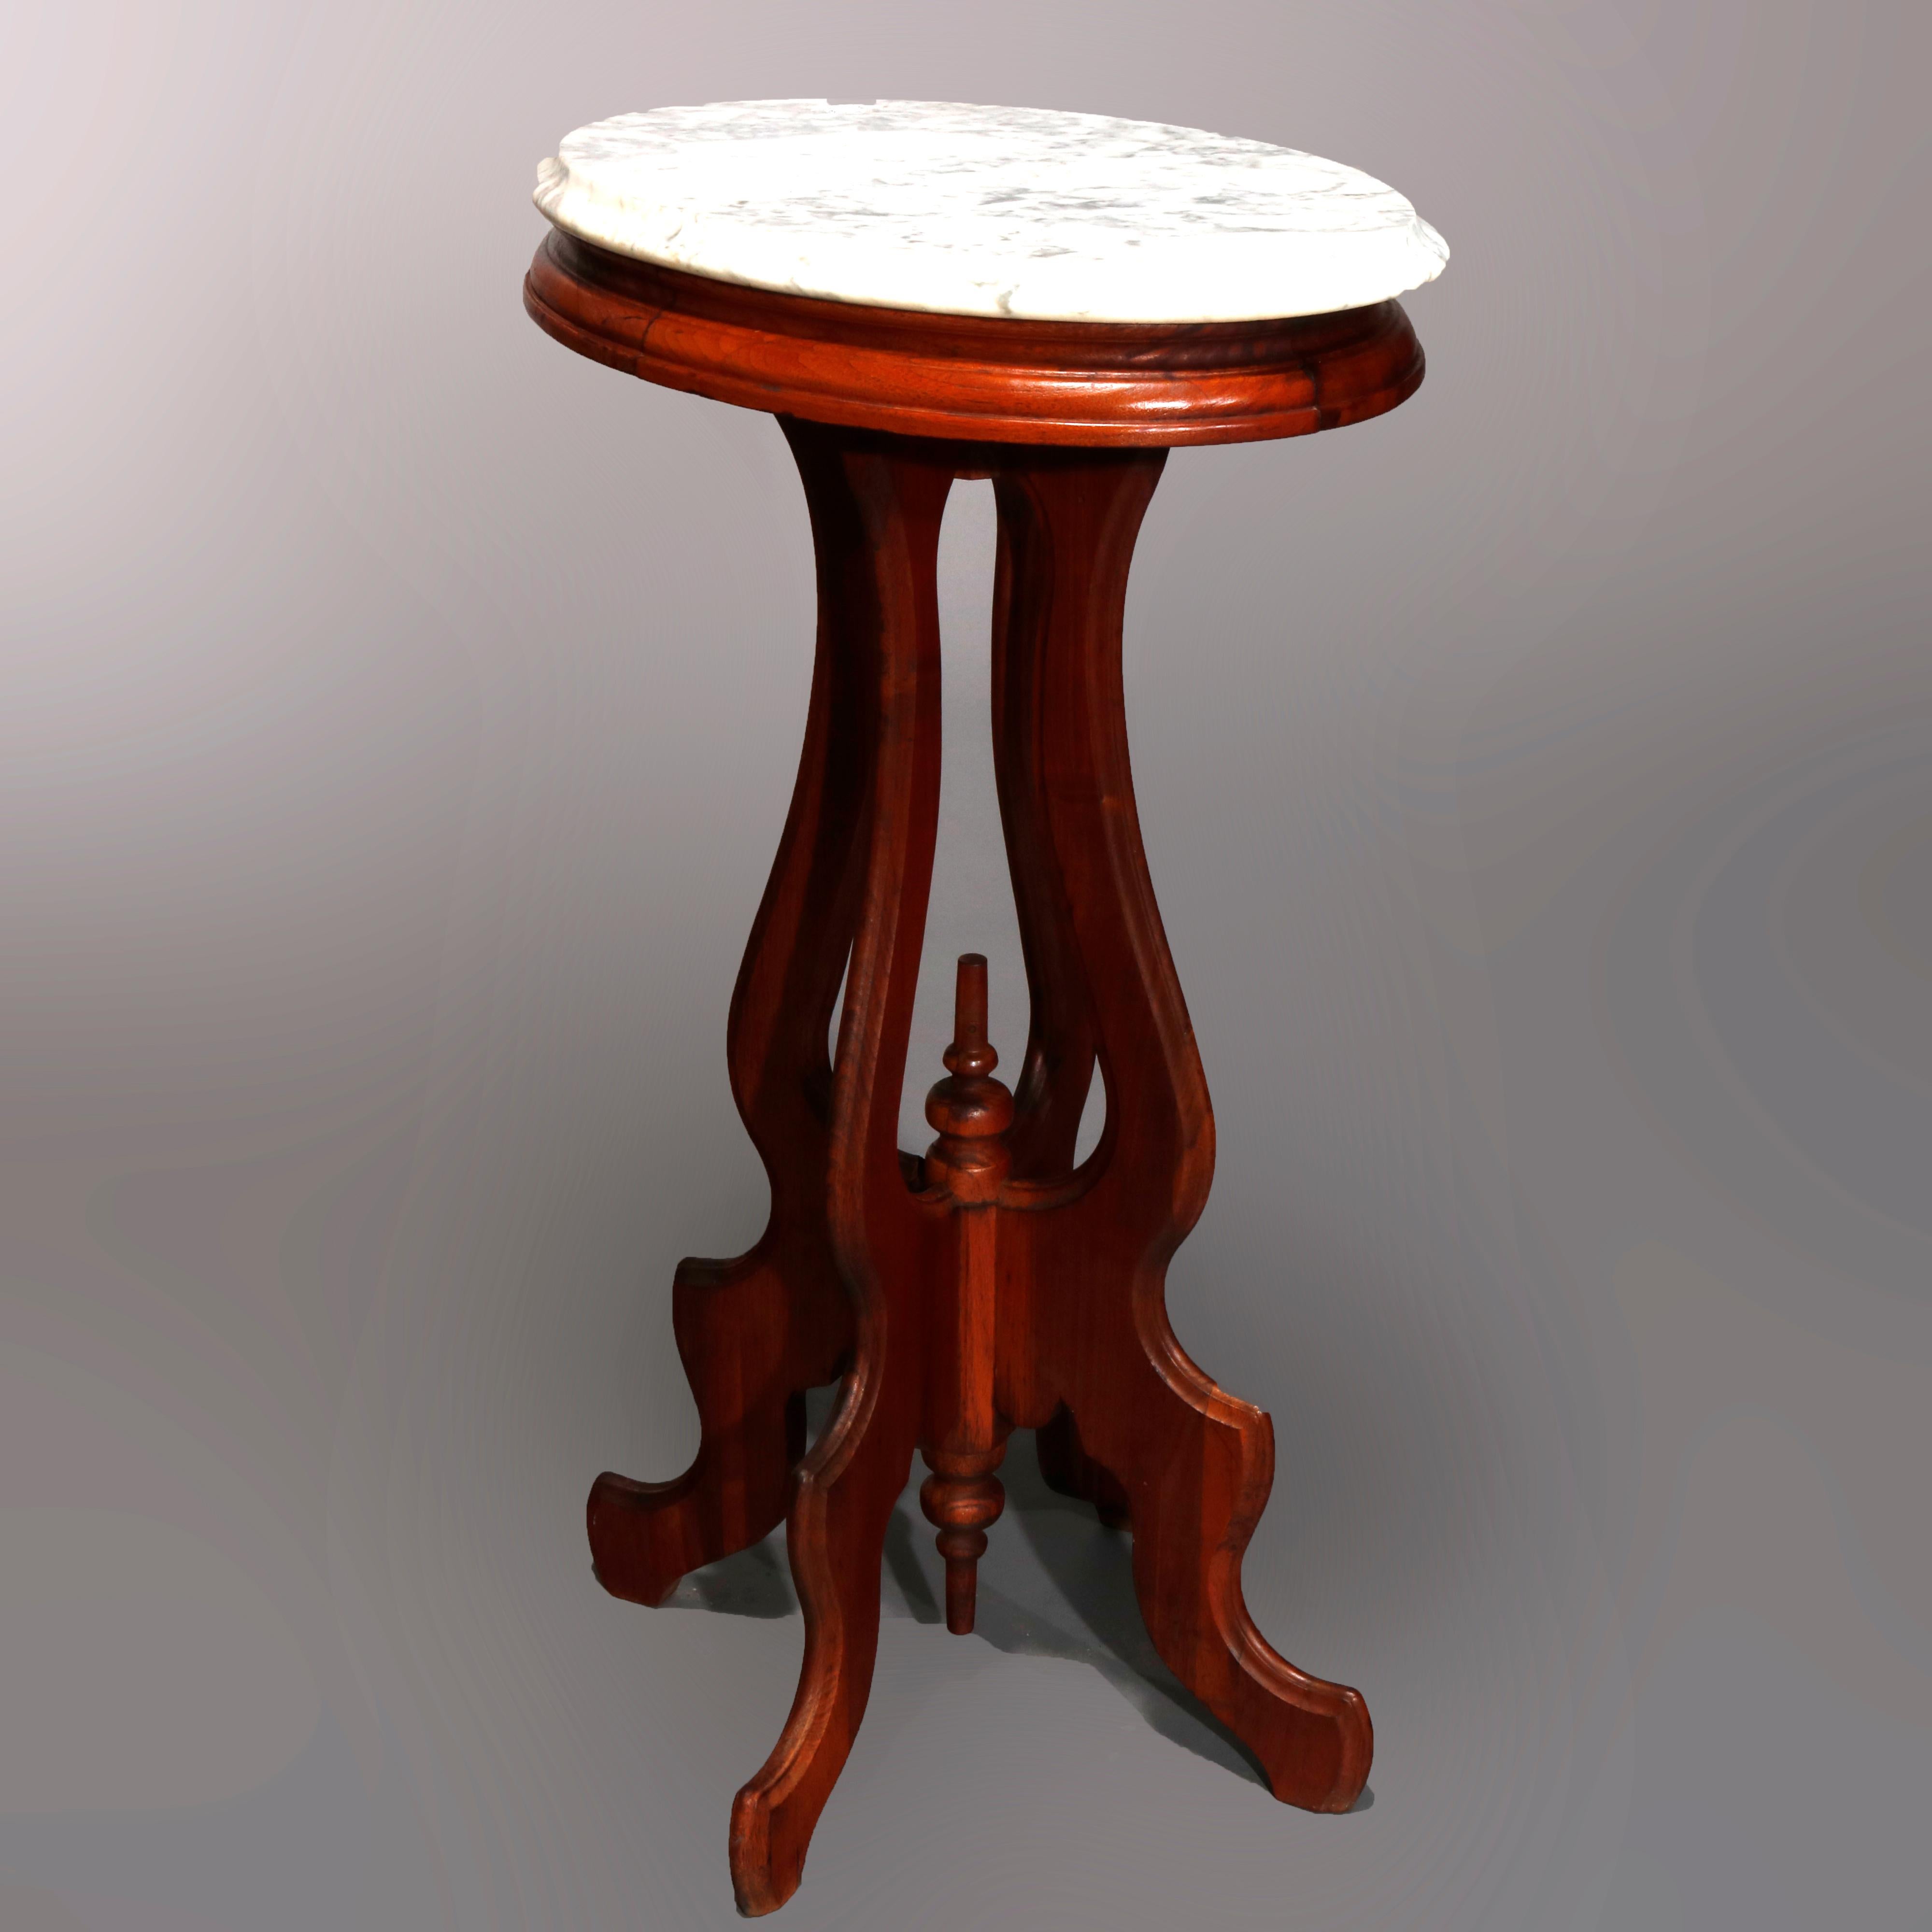 American Antique Victorian Oval Walnut Marble Top Plant Stand, circa 1900